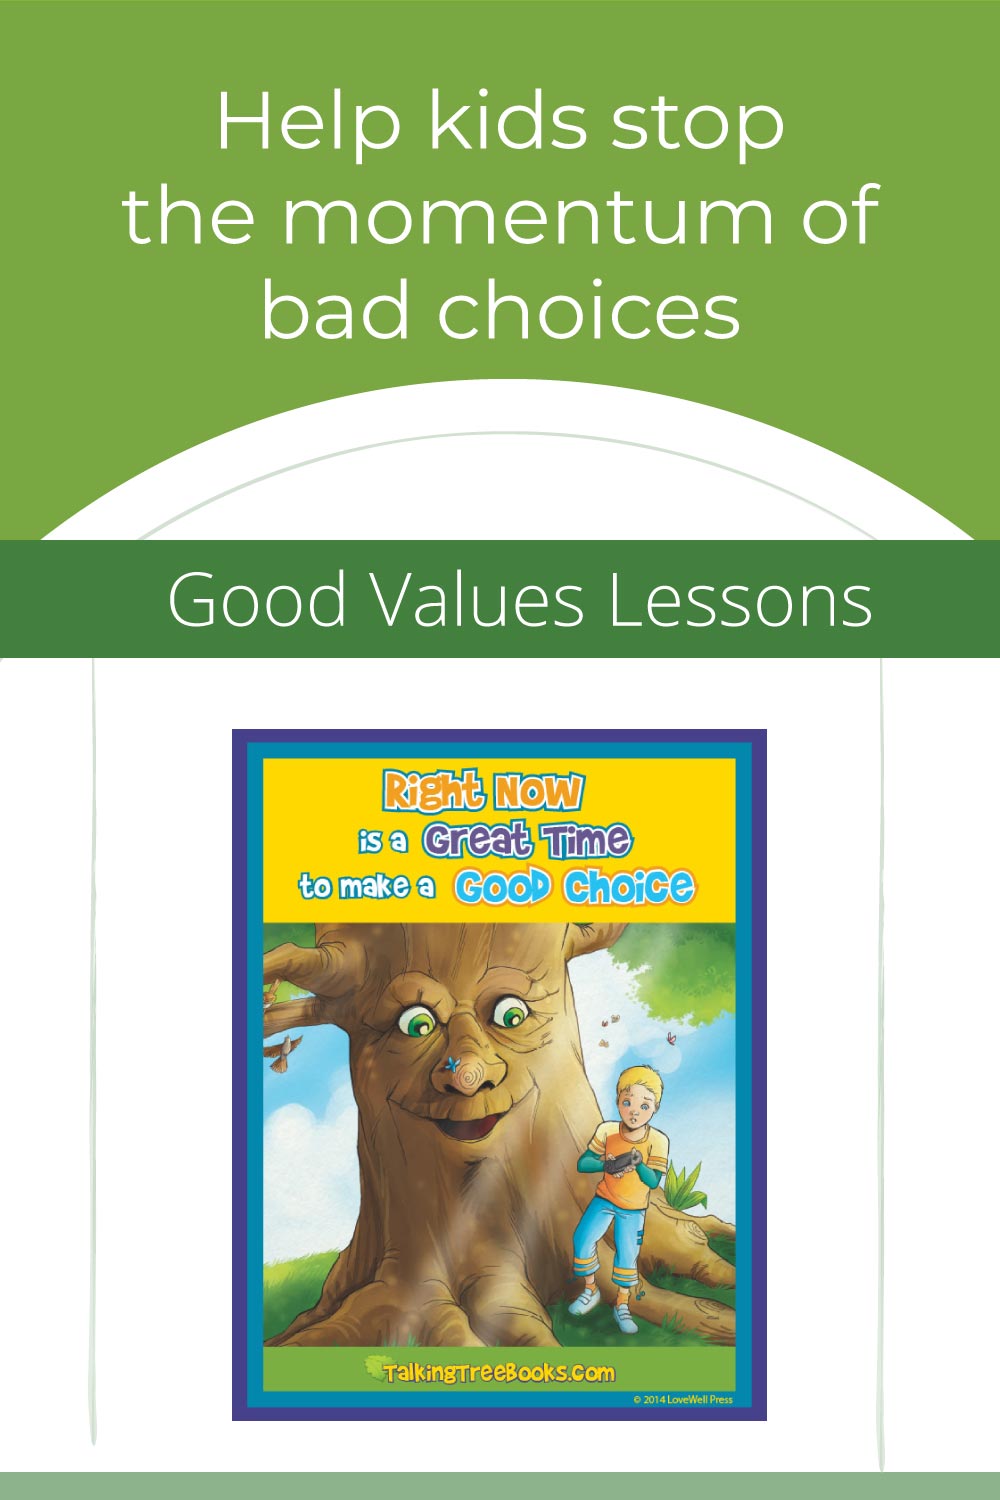 Teach kids to make good choices with good values and step out of the momentum of bad choices